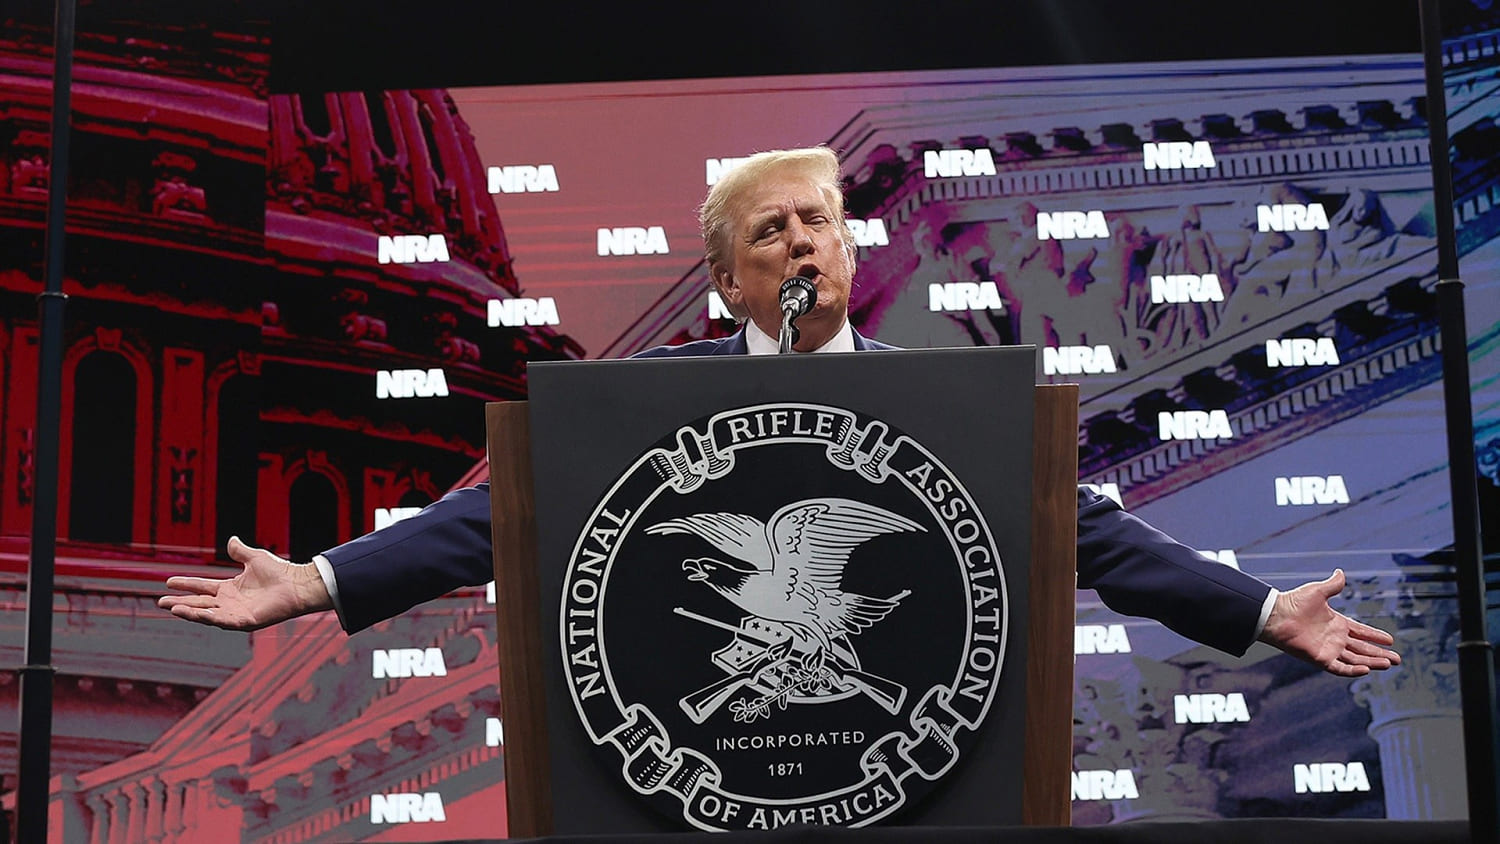 Trump accepts NRA endorsement, urges gun owners to vote